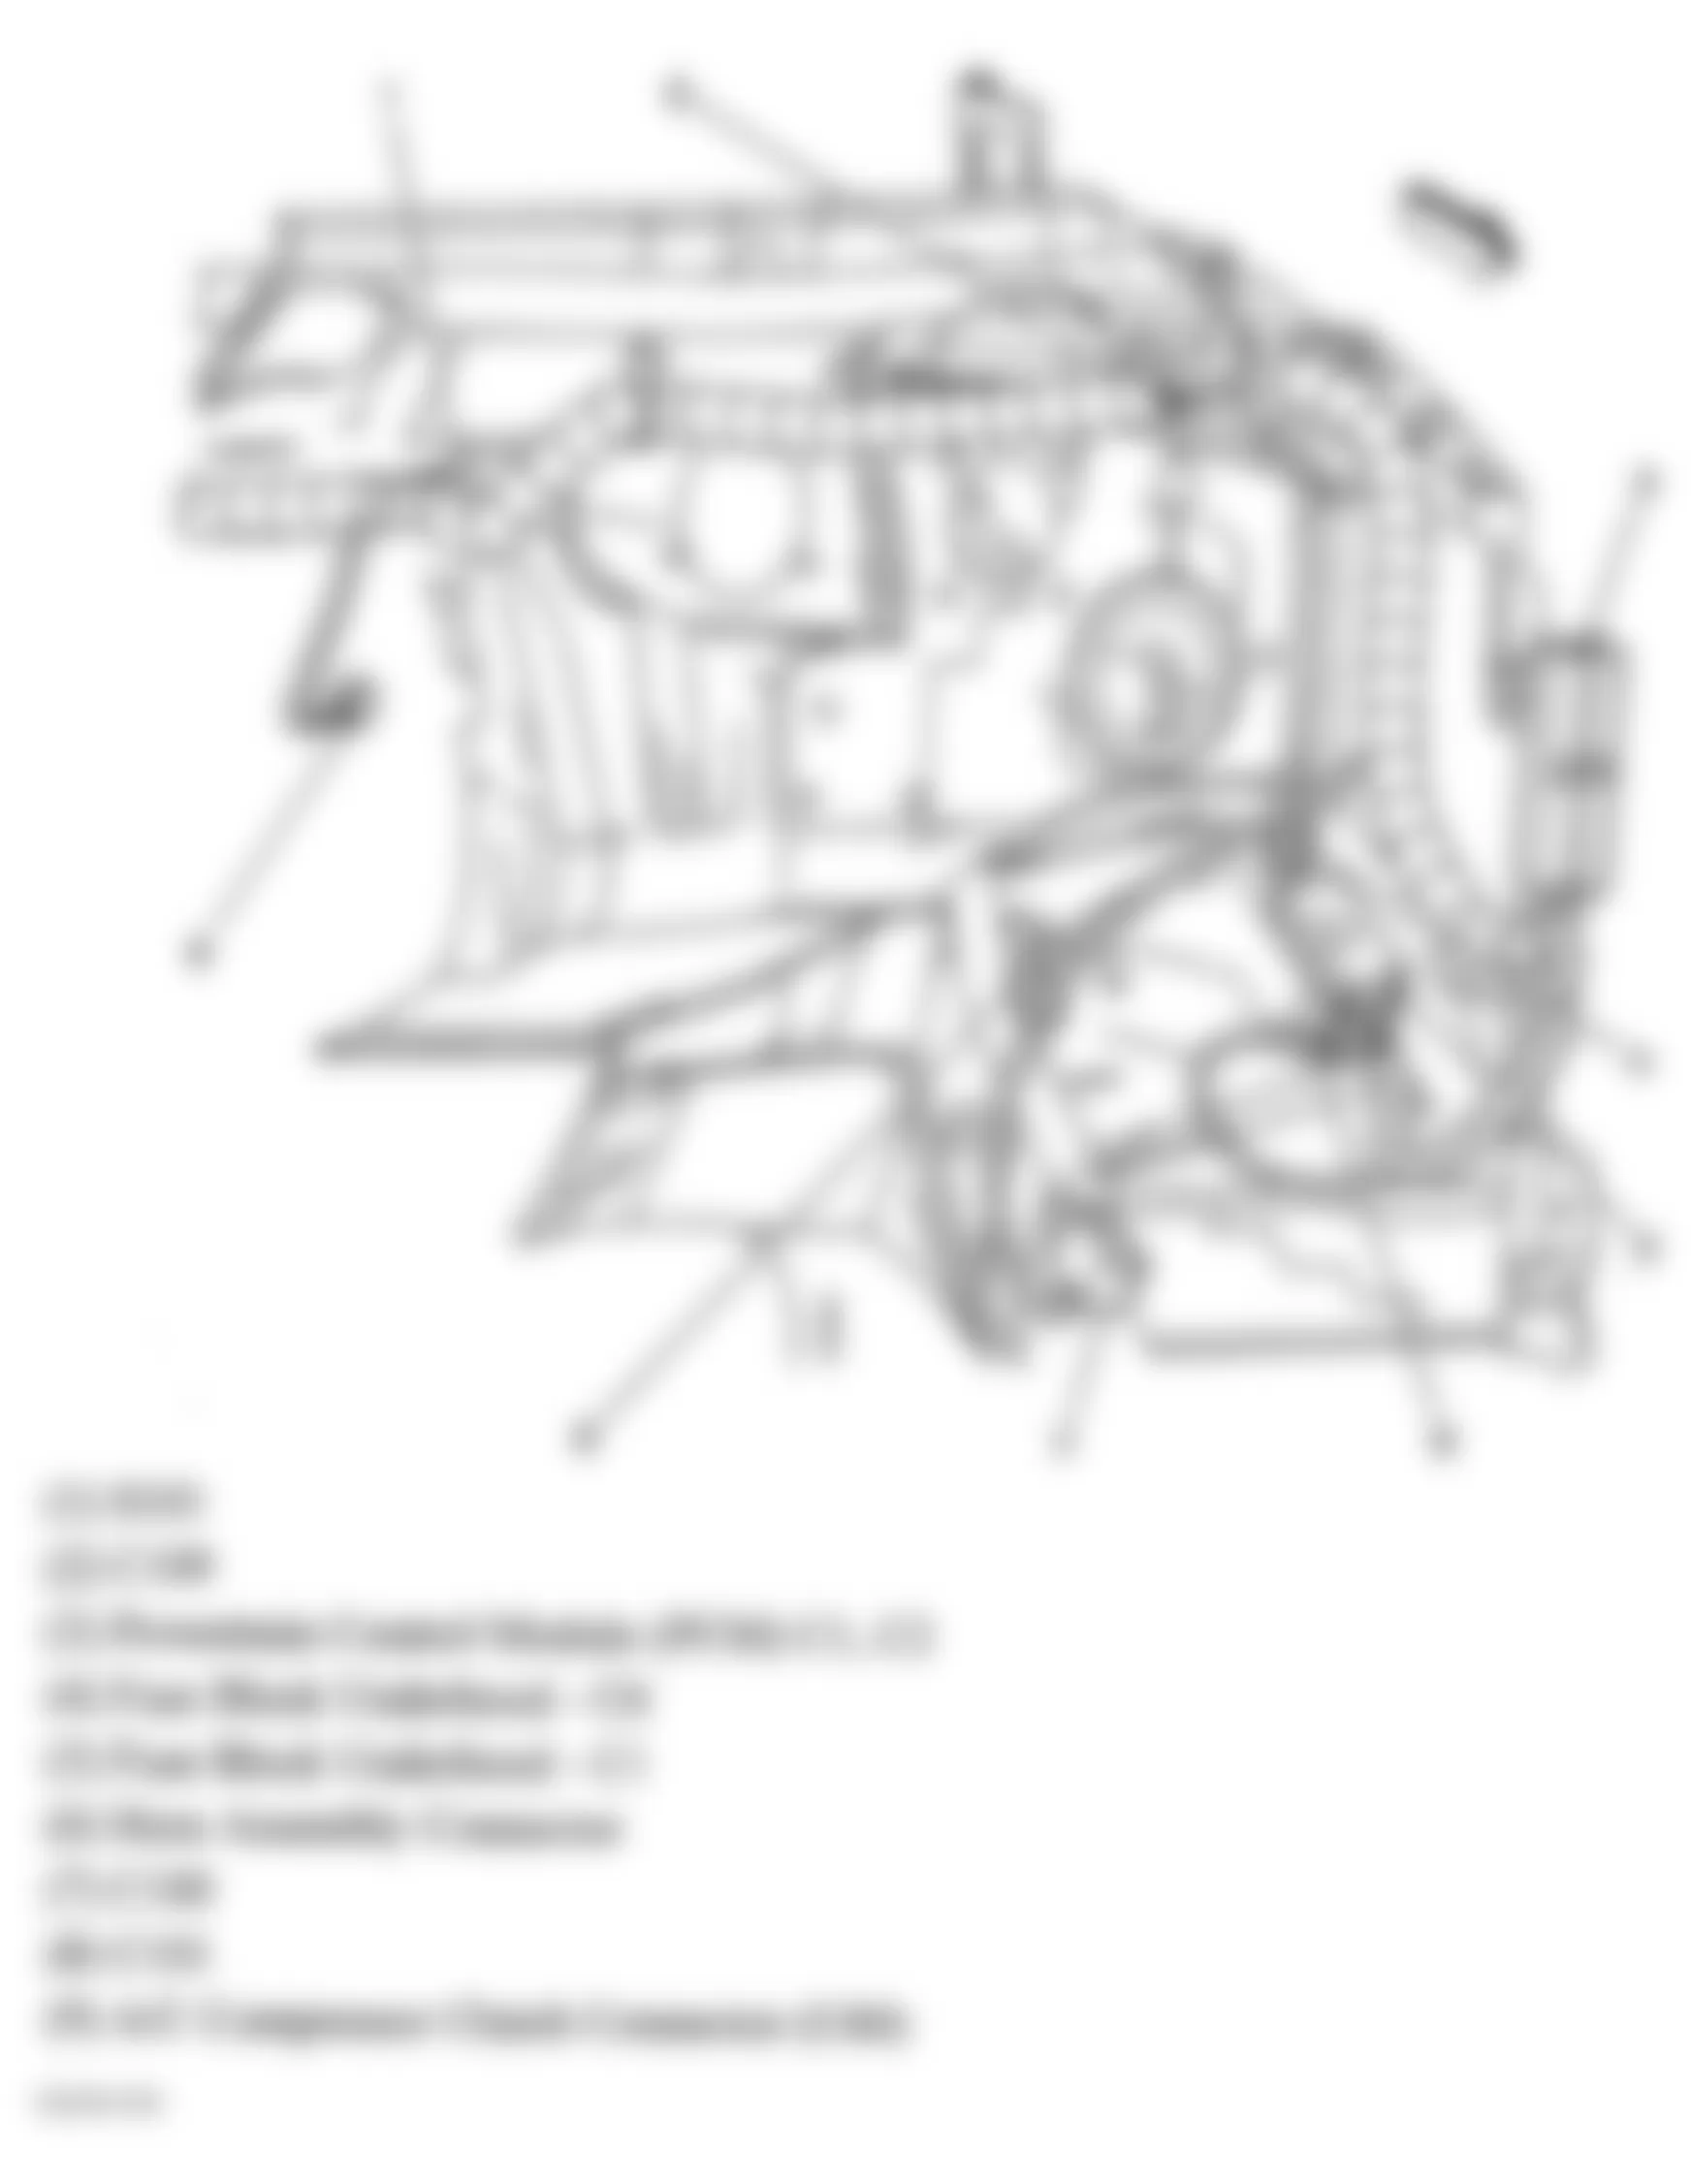 GMC Savana Special G3500 2005 - Component Locations -  Left Rear Of Engine Compartment